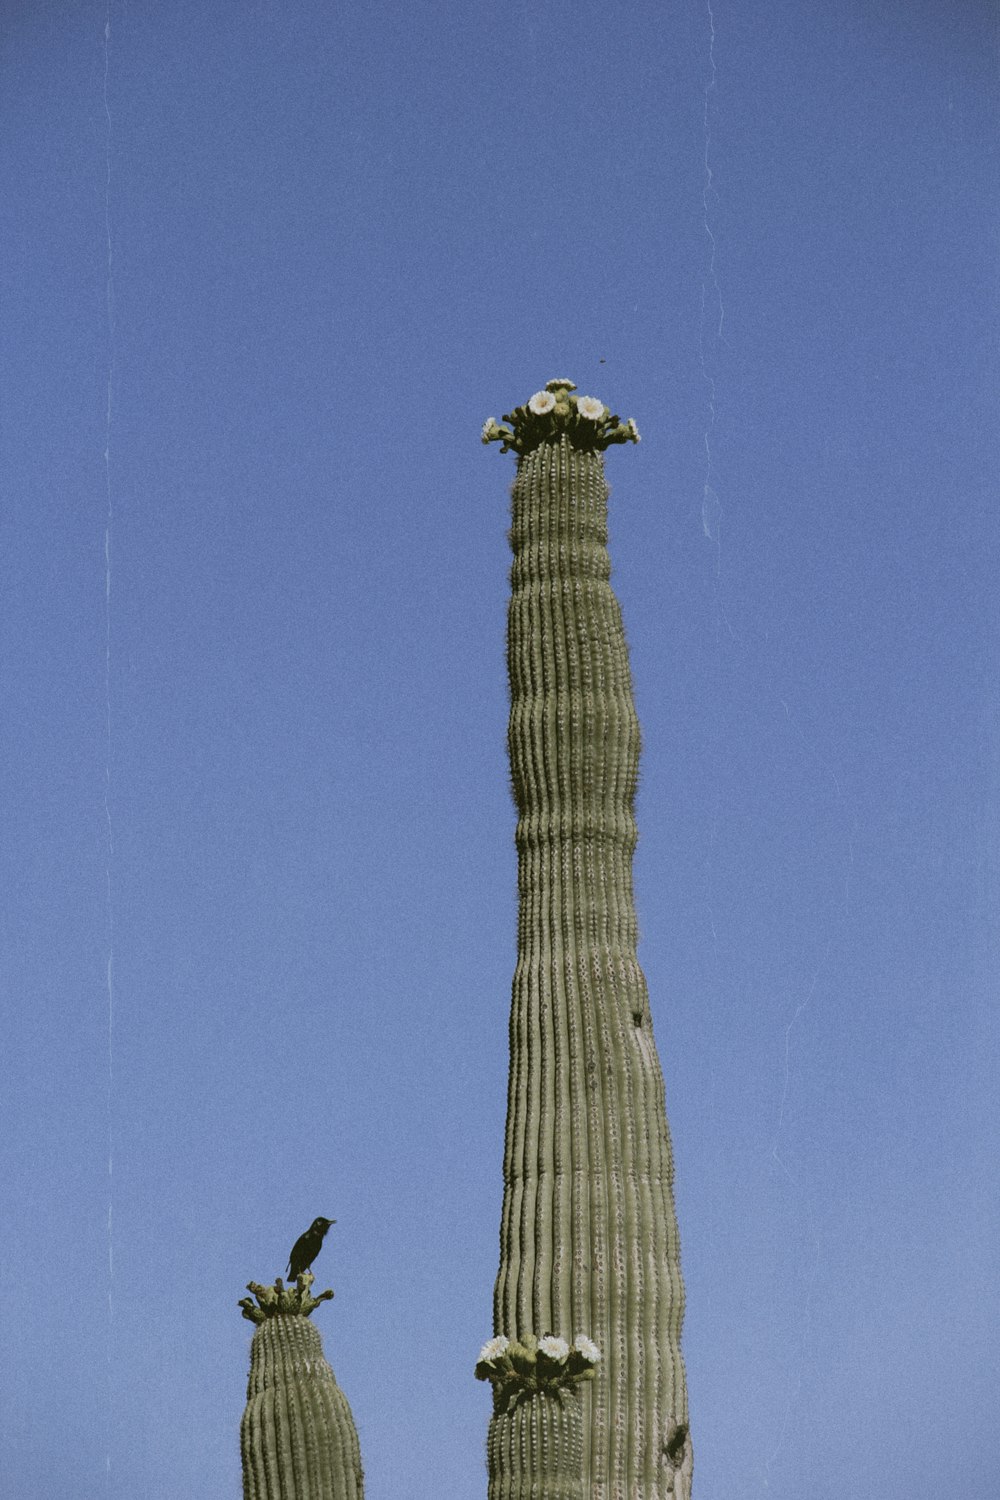 a tall cactus with a bird perched on top of it